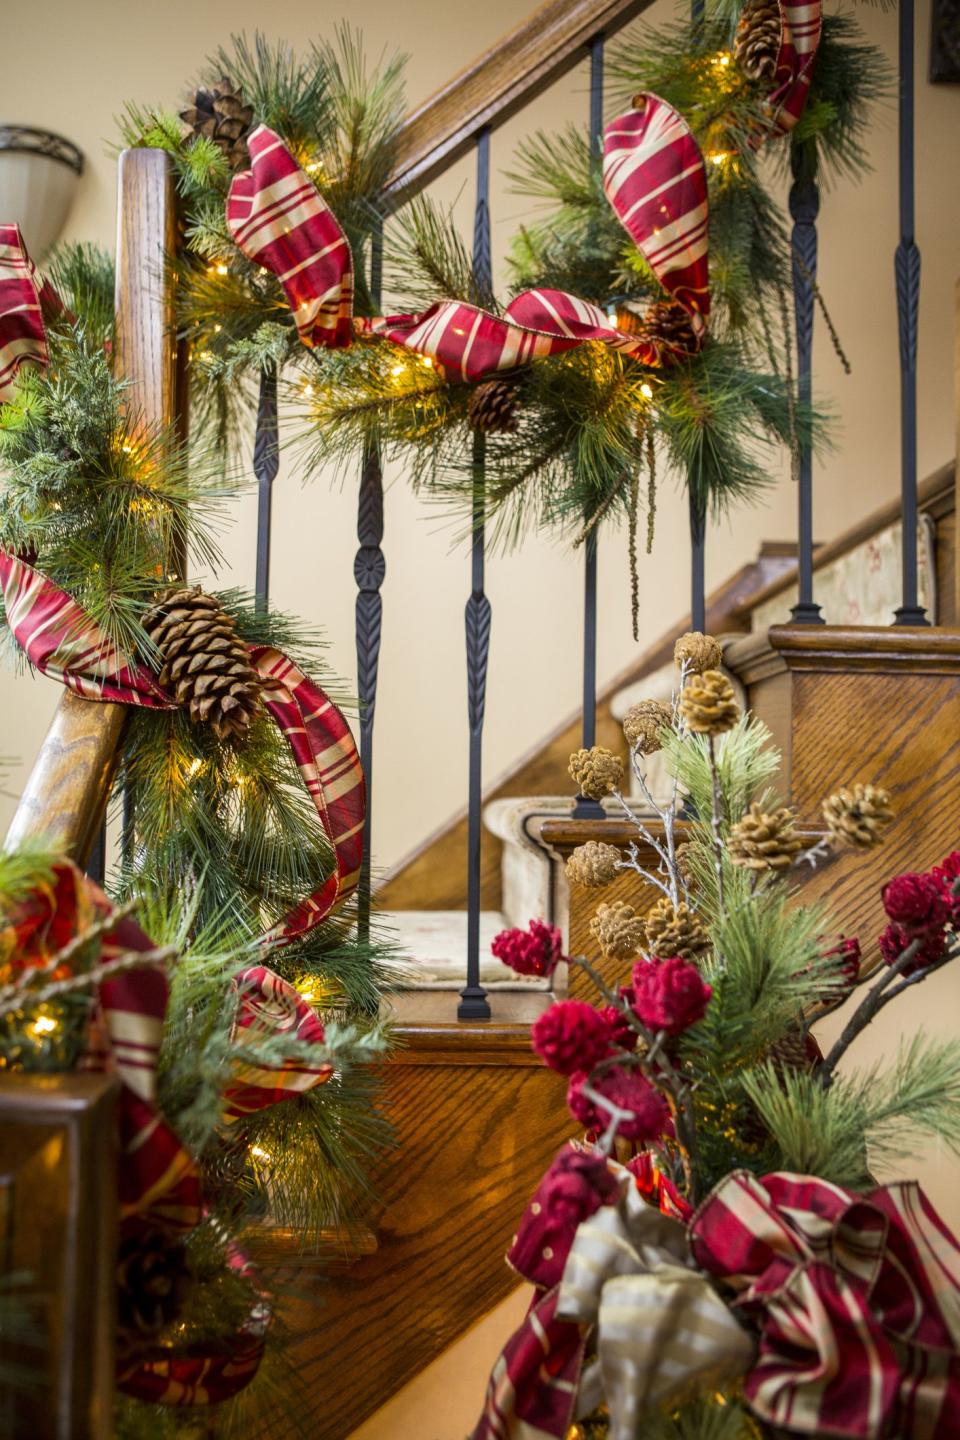 20+ Best Christmas Stair Decorations to Dress Up Your Home for the Holidays